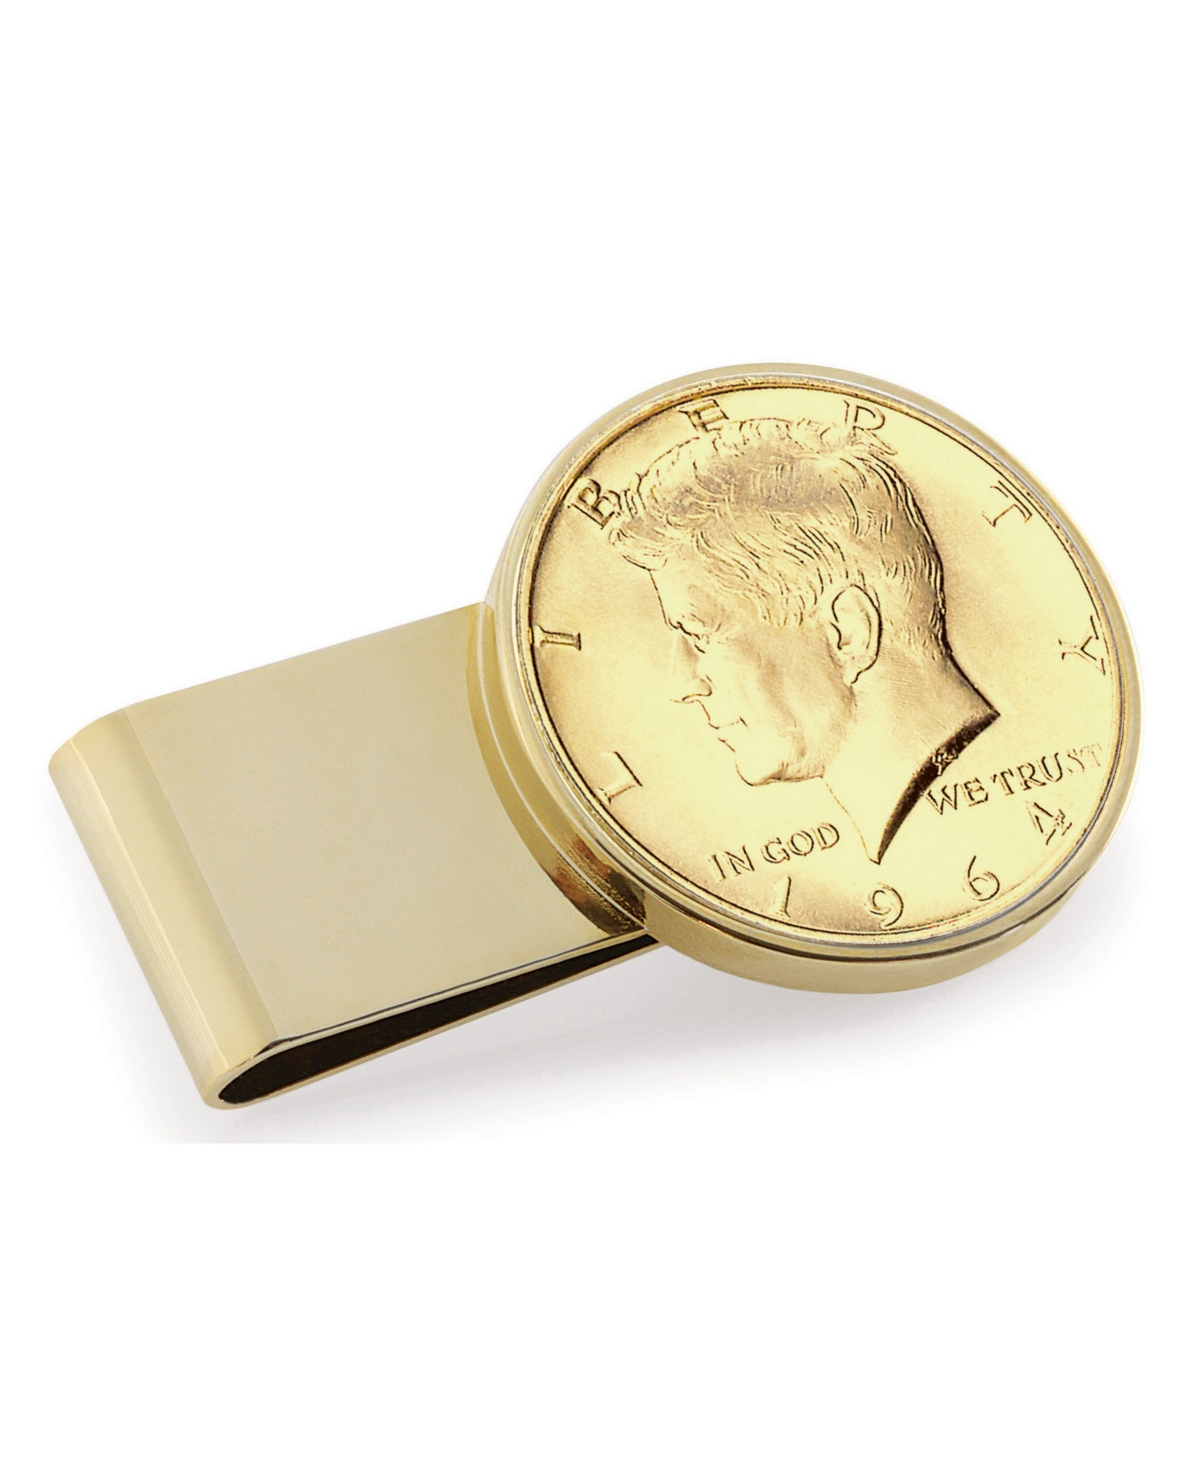 Men's American Coin Treasures Gold-Layered Jfk 1964 First Year of Issue Half Dollar Stainless Steel Coin Money Clip - Gold